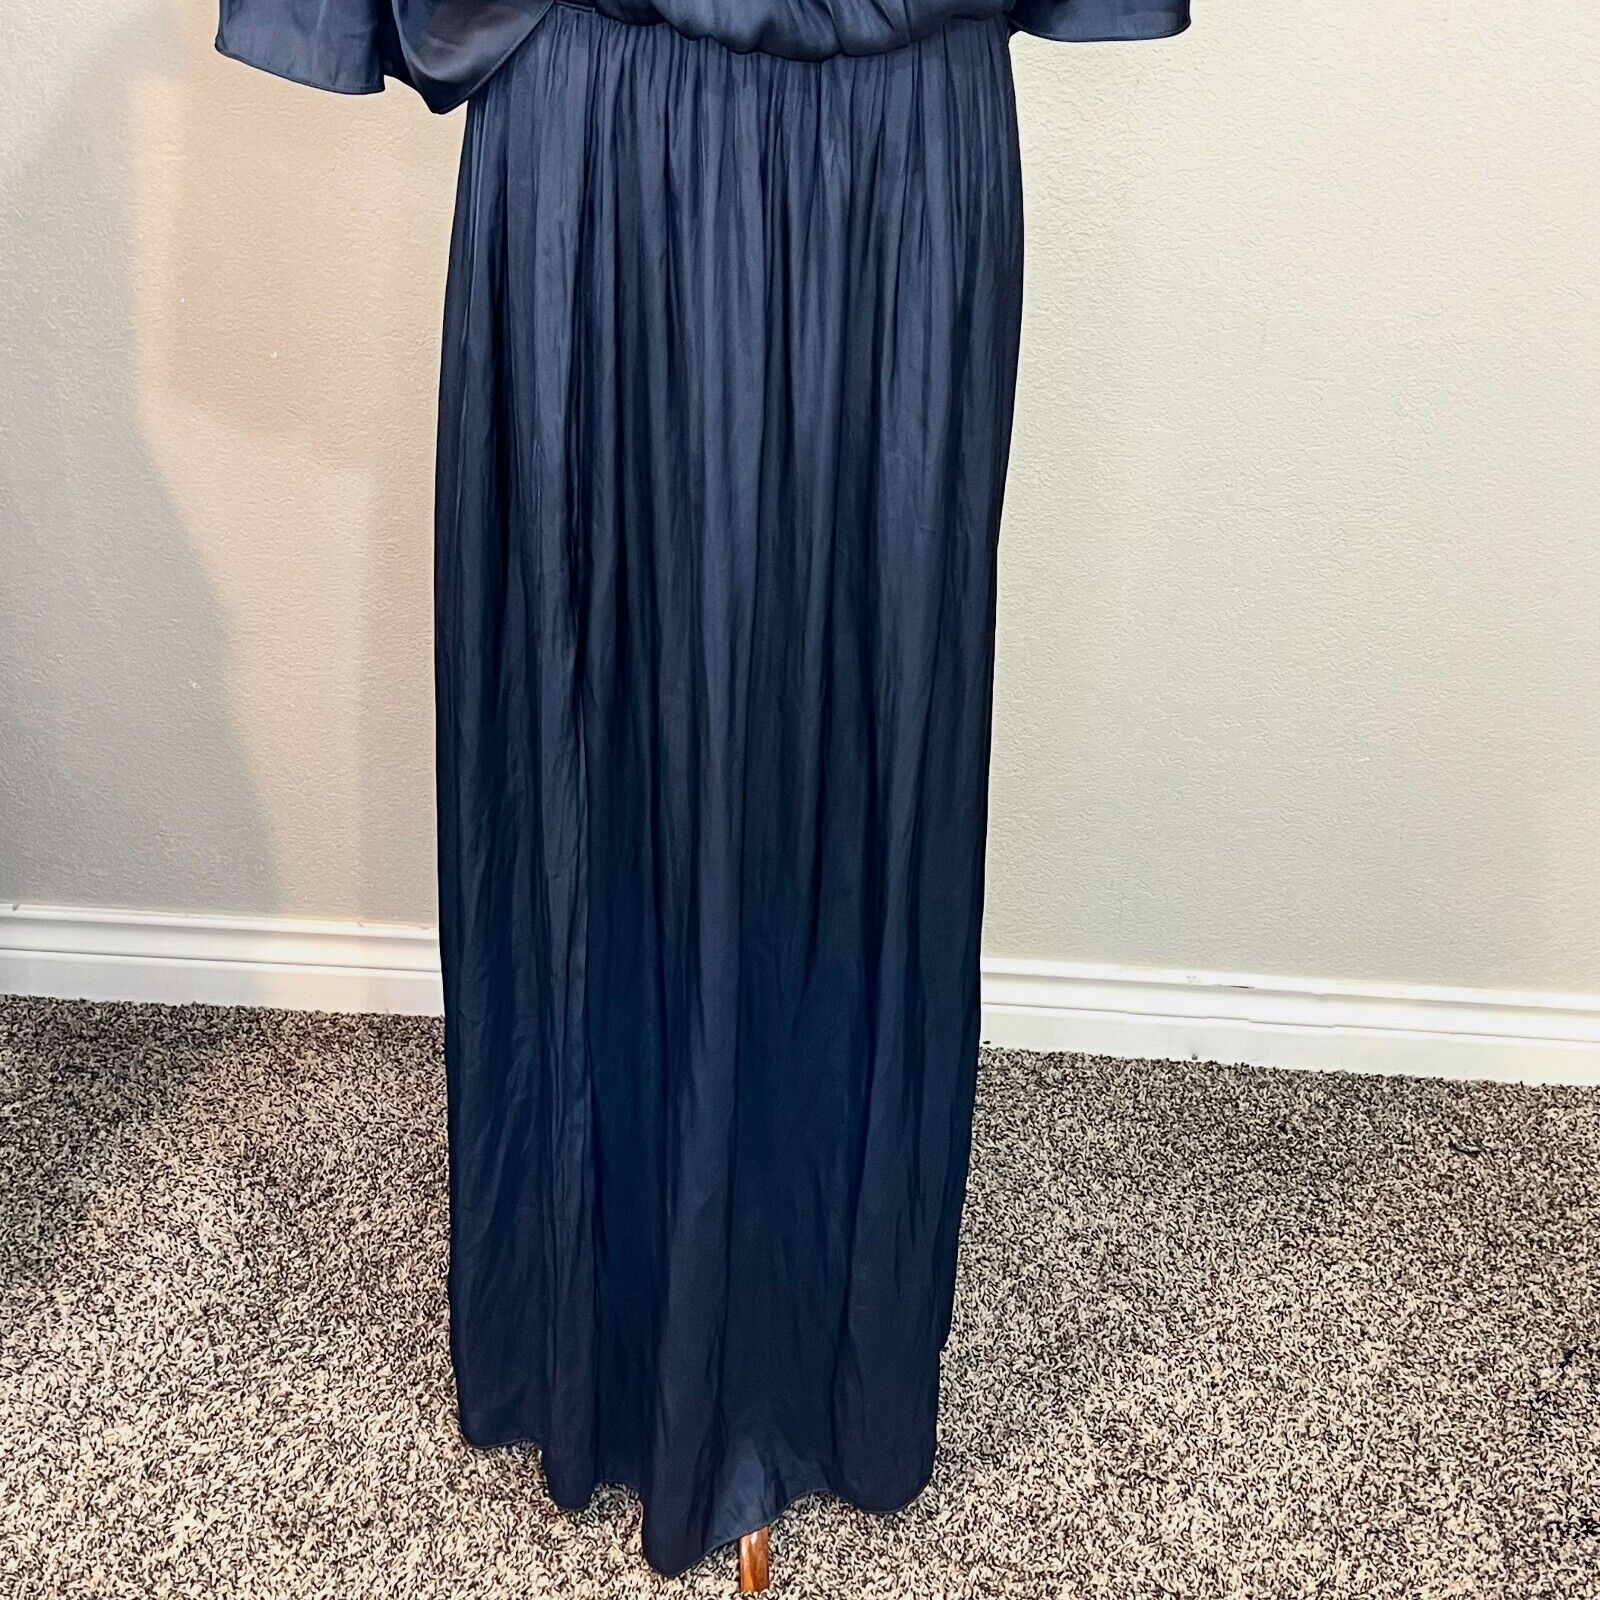 Halston Heritage Navy Blue Flowy Off-the-Shoulder Smocked Gown Size Large NEW